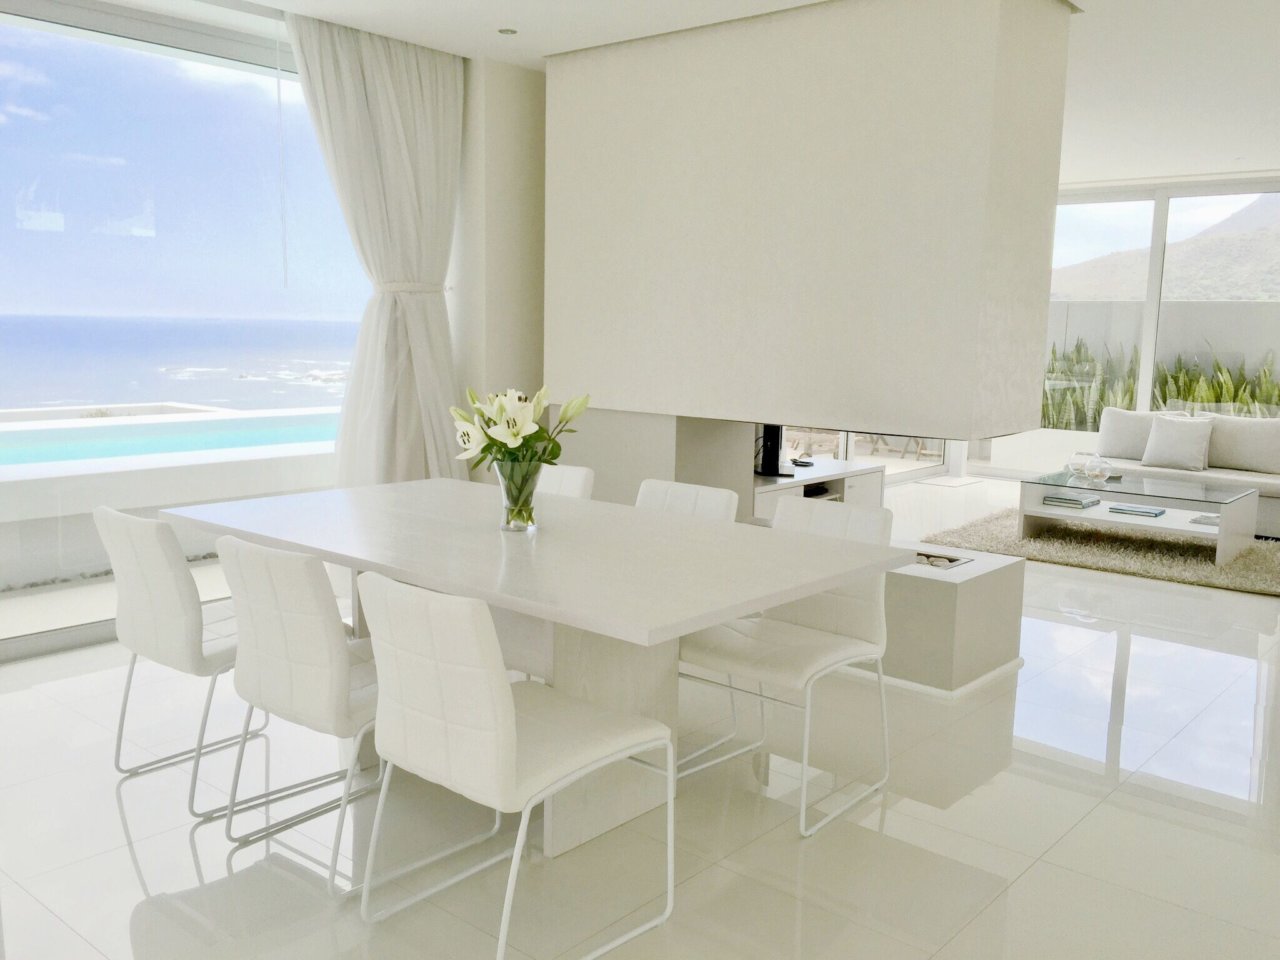 Photo 29 of Aqua Penthouse accommodation in Camps Bay, Cape Town with 2 bedrooms and 2 bathrooms